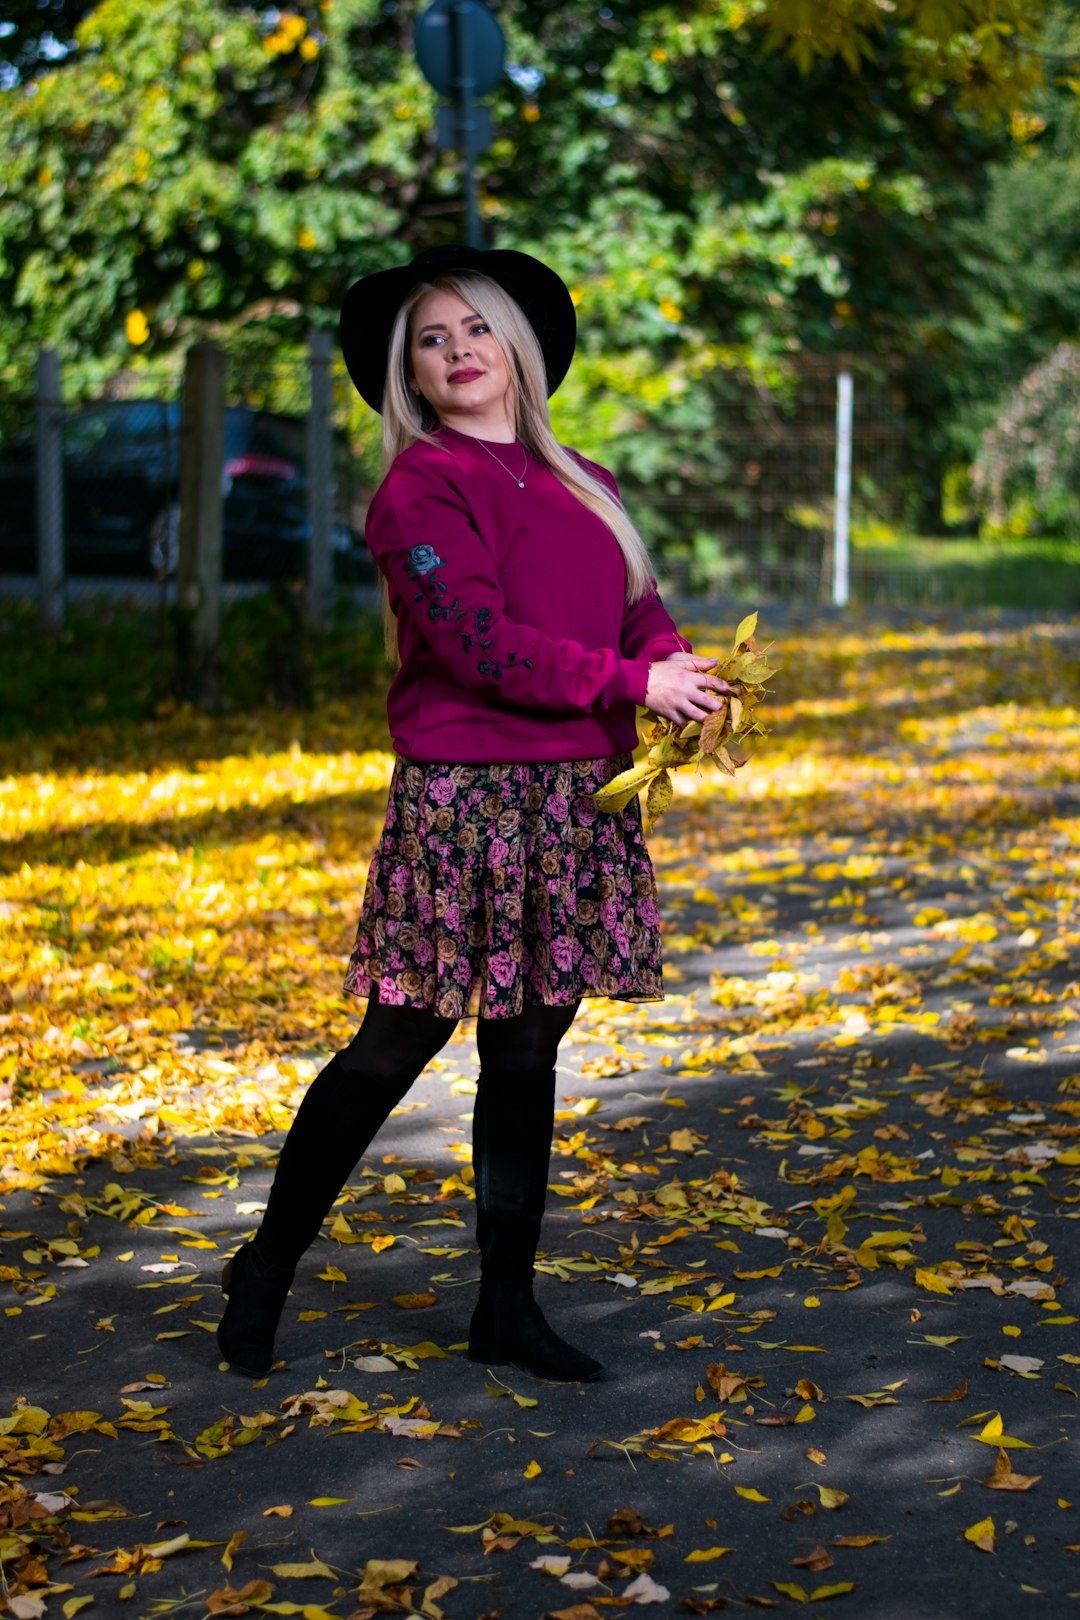 girl in pink long sleeve shirt and black skirt standing on yellow leaves on ground during